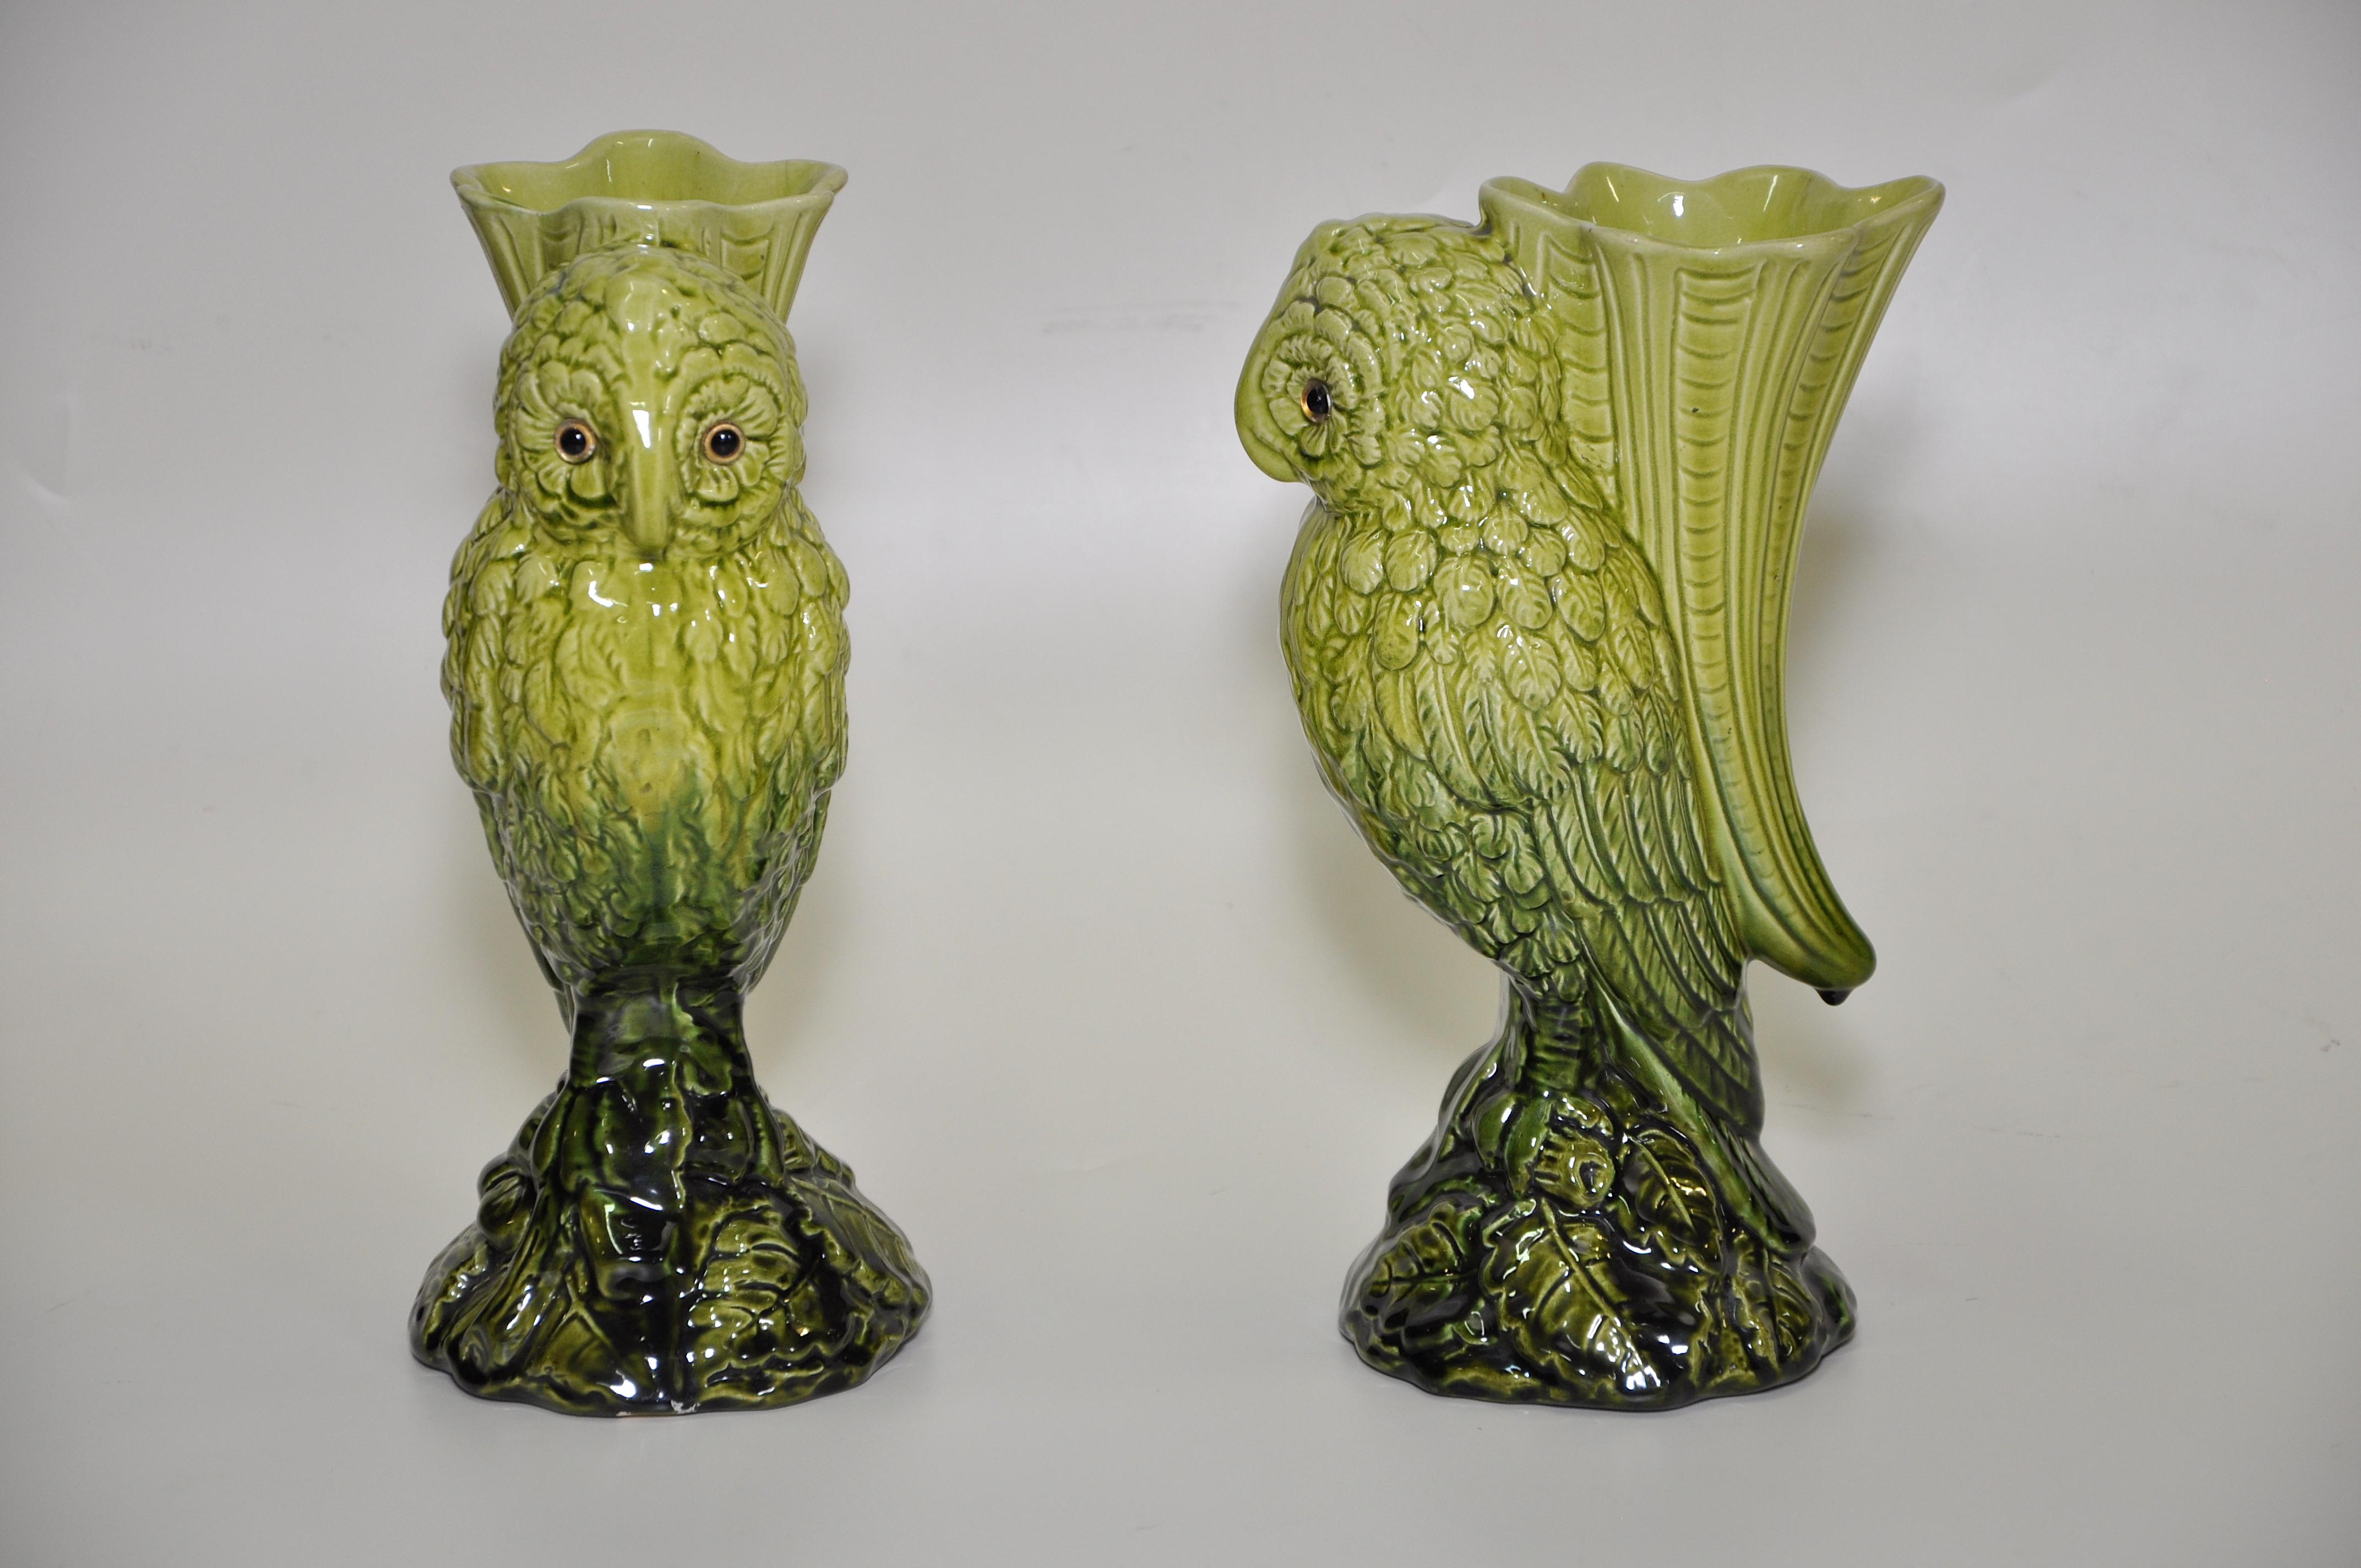 Pair of Victorian pottery vases English European circa 1900 rare ceramic green owls 

Two matching striking vibrant green ceramic pottery vases, would be stunning placed on a mantlepiece above a fire. In a vibrant hue that would work well with